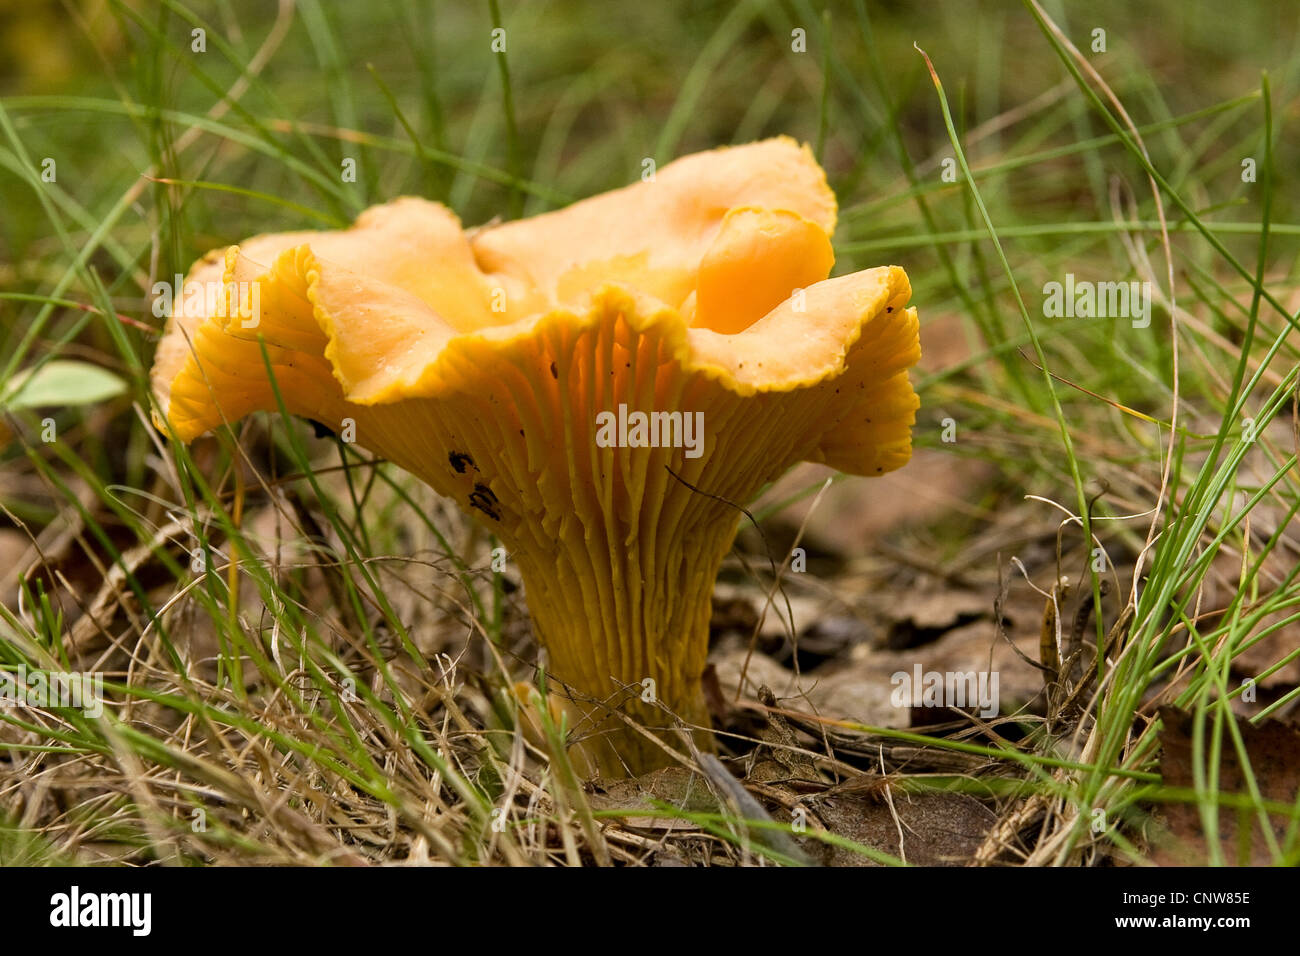 chanterelle (Cantharellus cibarius), in grass, Germany Stock Photo